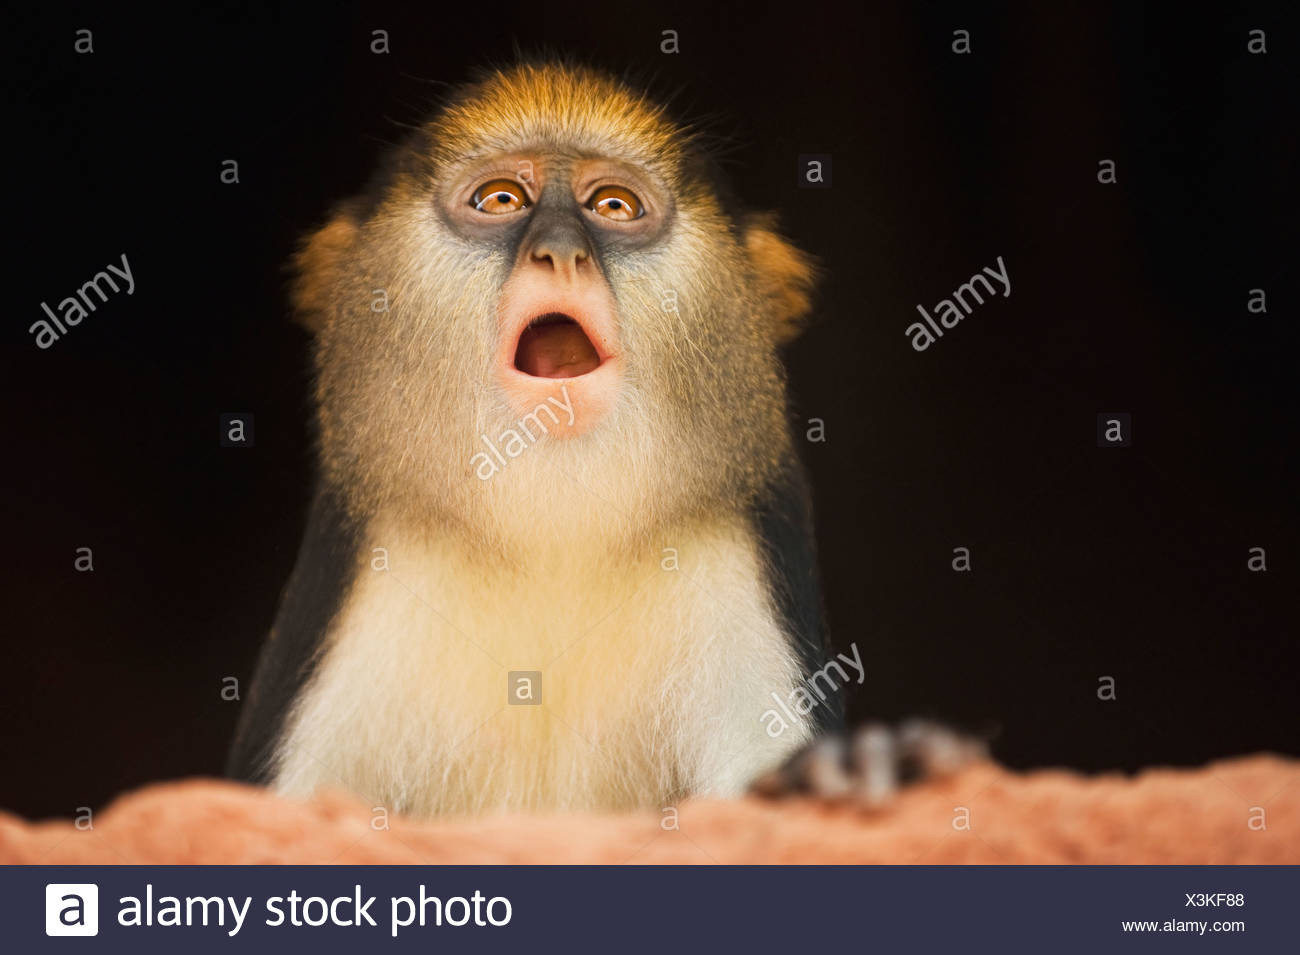 Haus Affe
 Monkey With Mouth Open Stockfotos & Monkey With Mouth Open